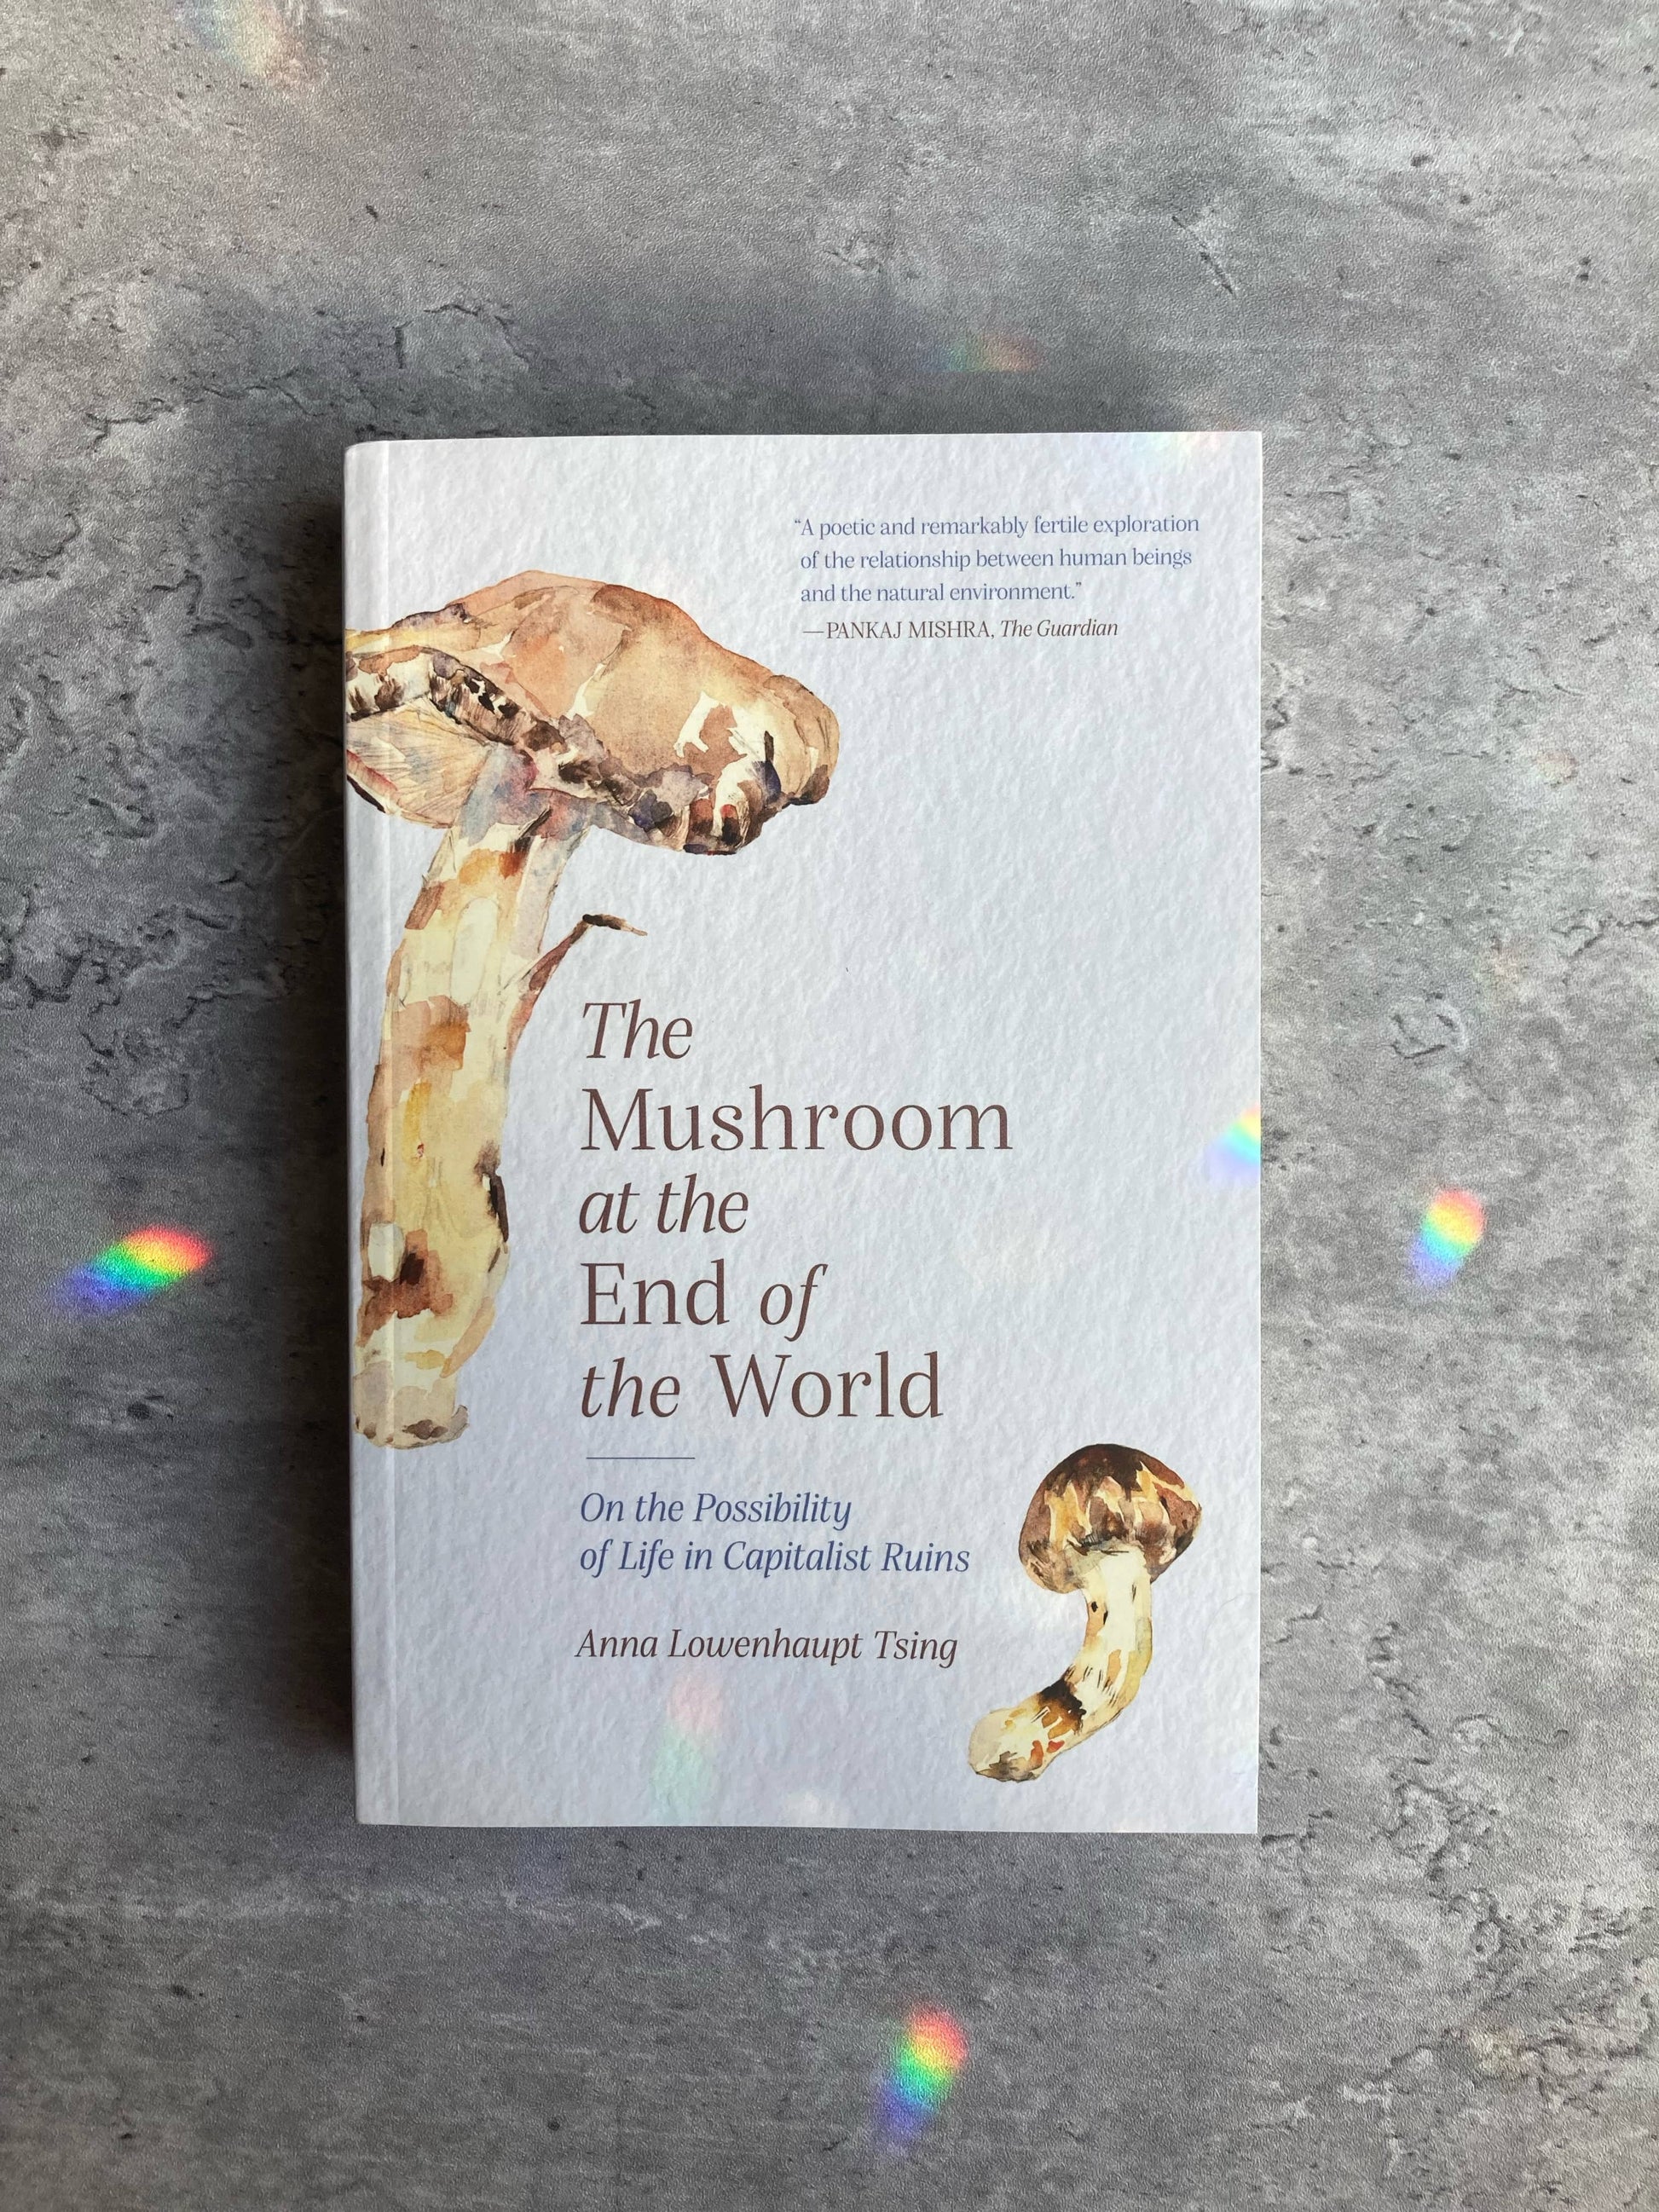 The Mushroom at the End of the World by Anna Lowenhaupt Tsing. Shop for new and used books with The Stone Circle, the only online bookstore near you in Los Angeles, California.